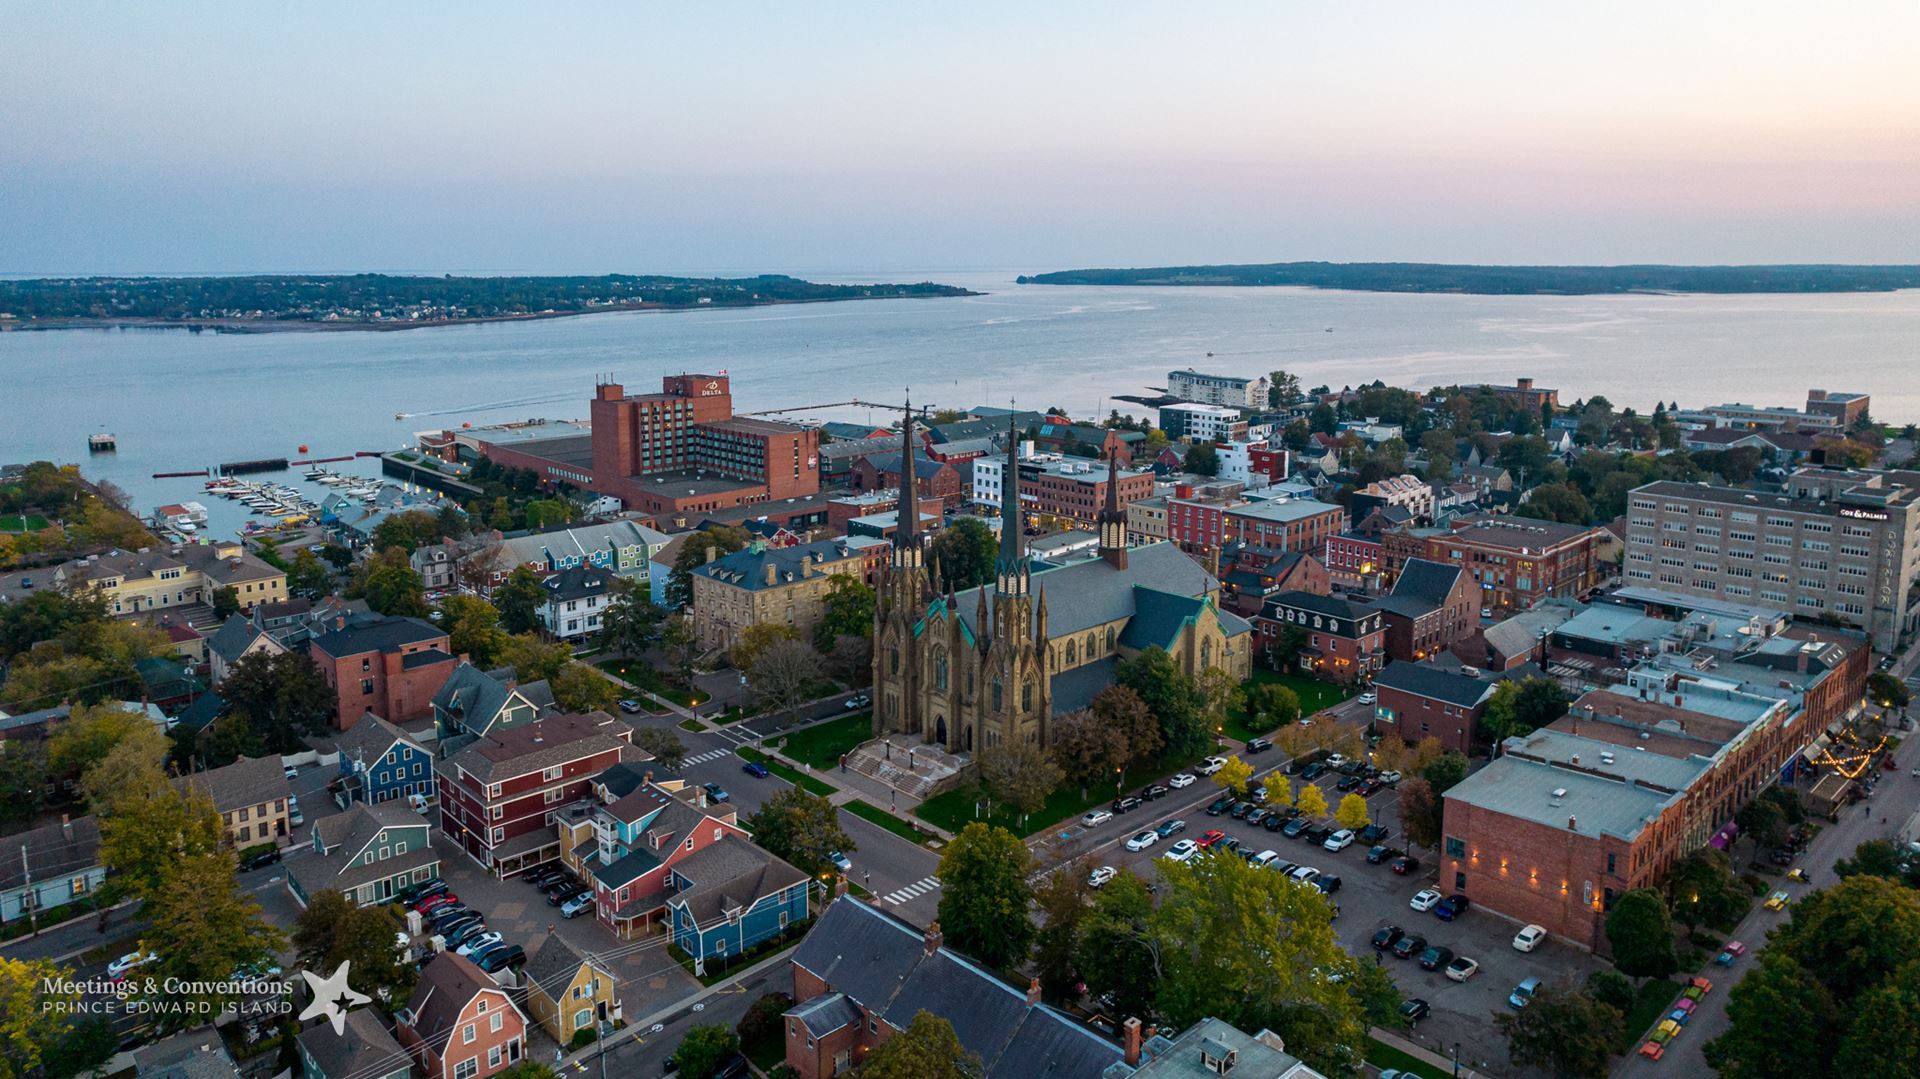 Aerial image of Charlottetown, PEI at dusk. View of the Delta PEI and the harbour. Image provided by Tourism PEI.